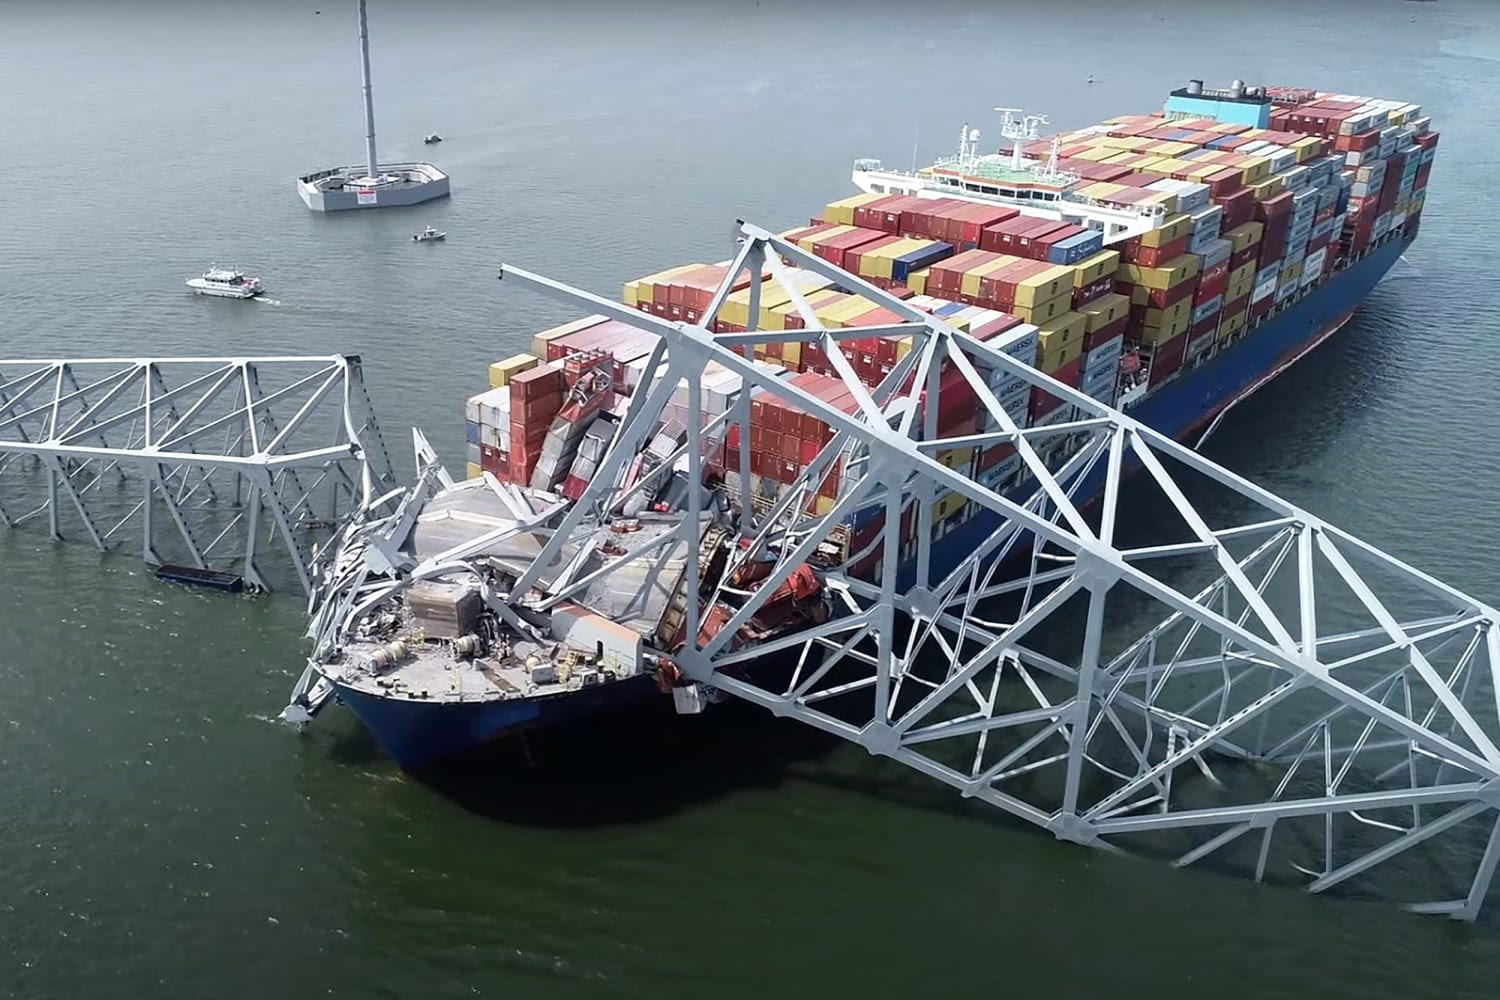 A recovery mission is underway after 6 are presumed dead in the Baltimore bridge collapse 240326-Francis-Scott-Key-Bridge-collapse-aftermath-container-ship-dali-ac-1159p-d00fe9